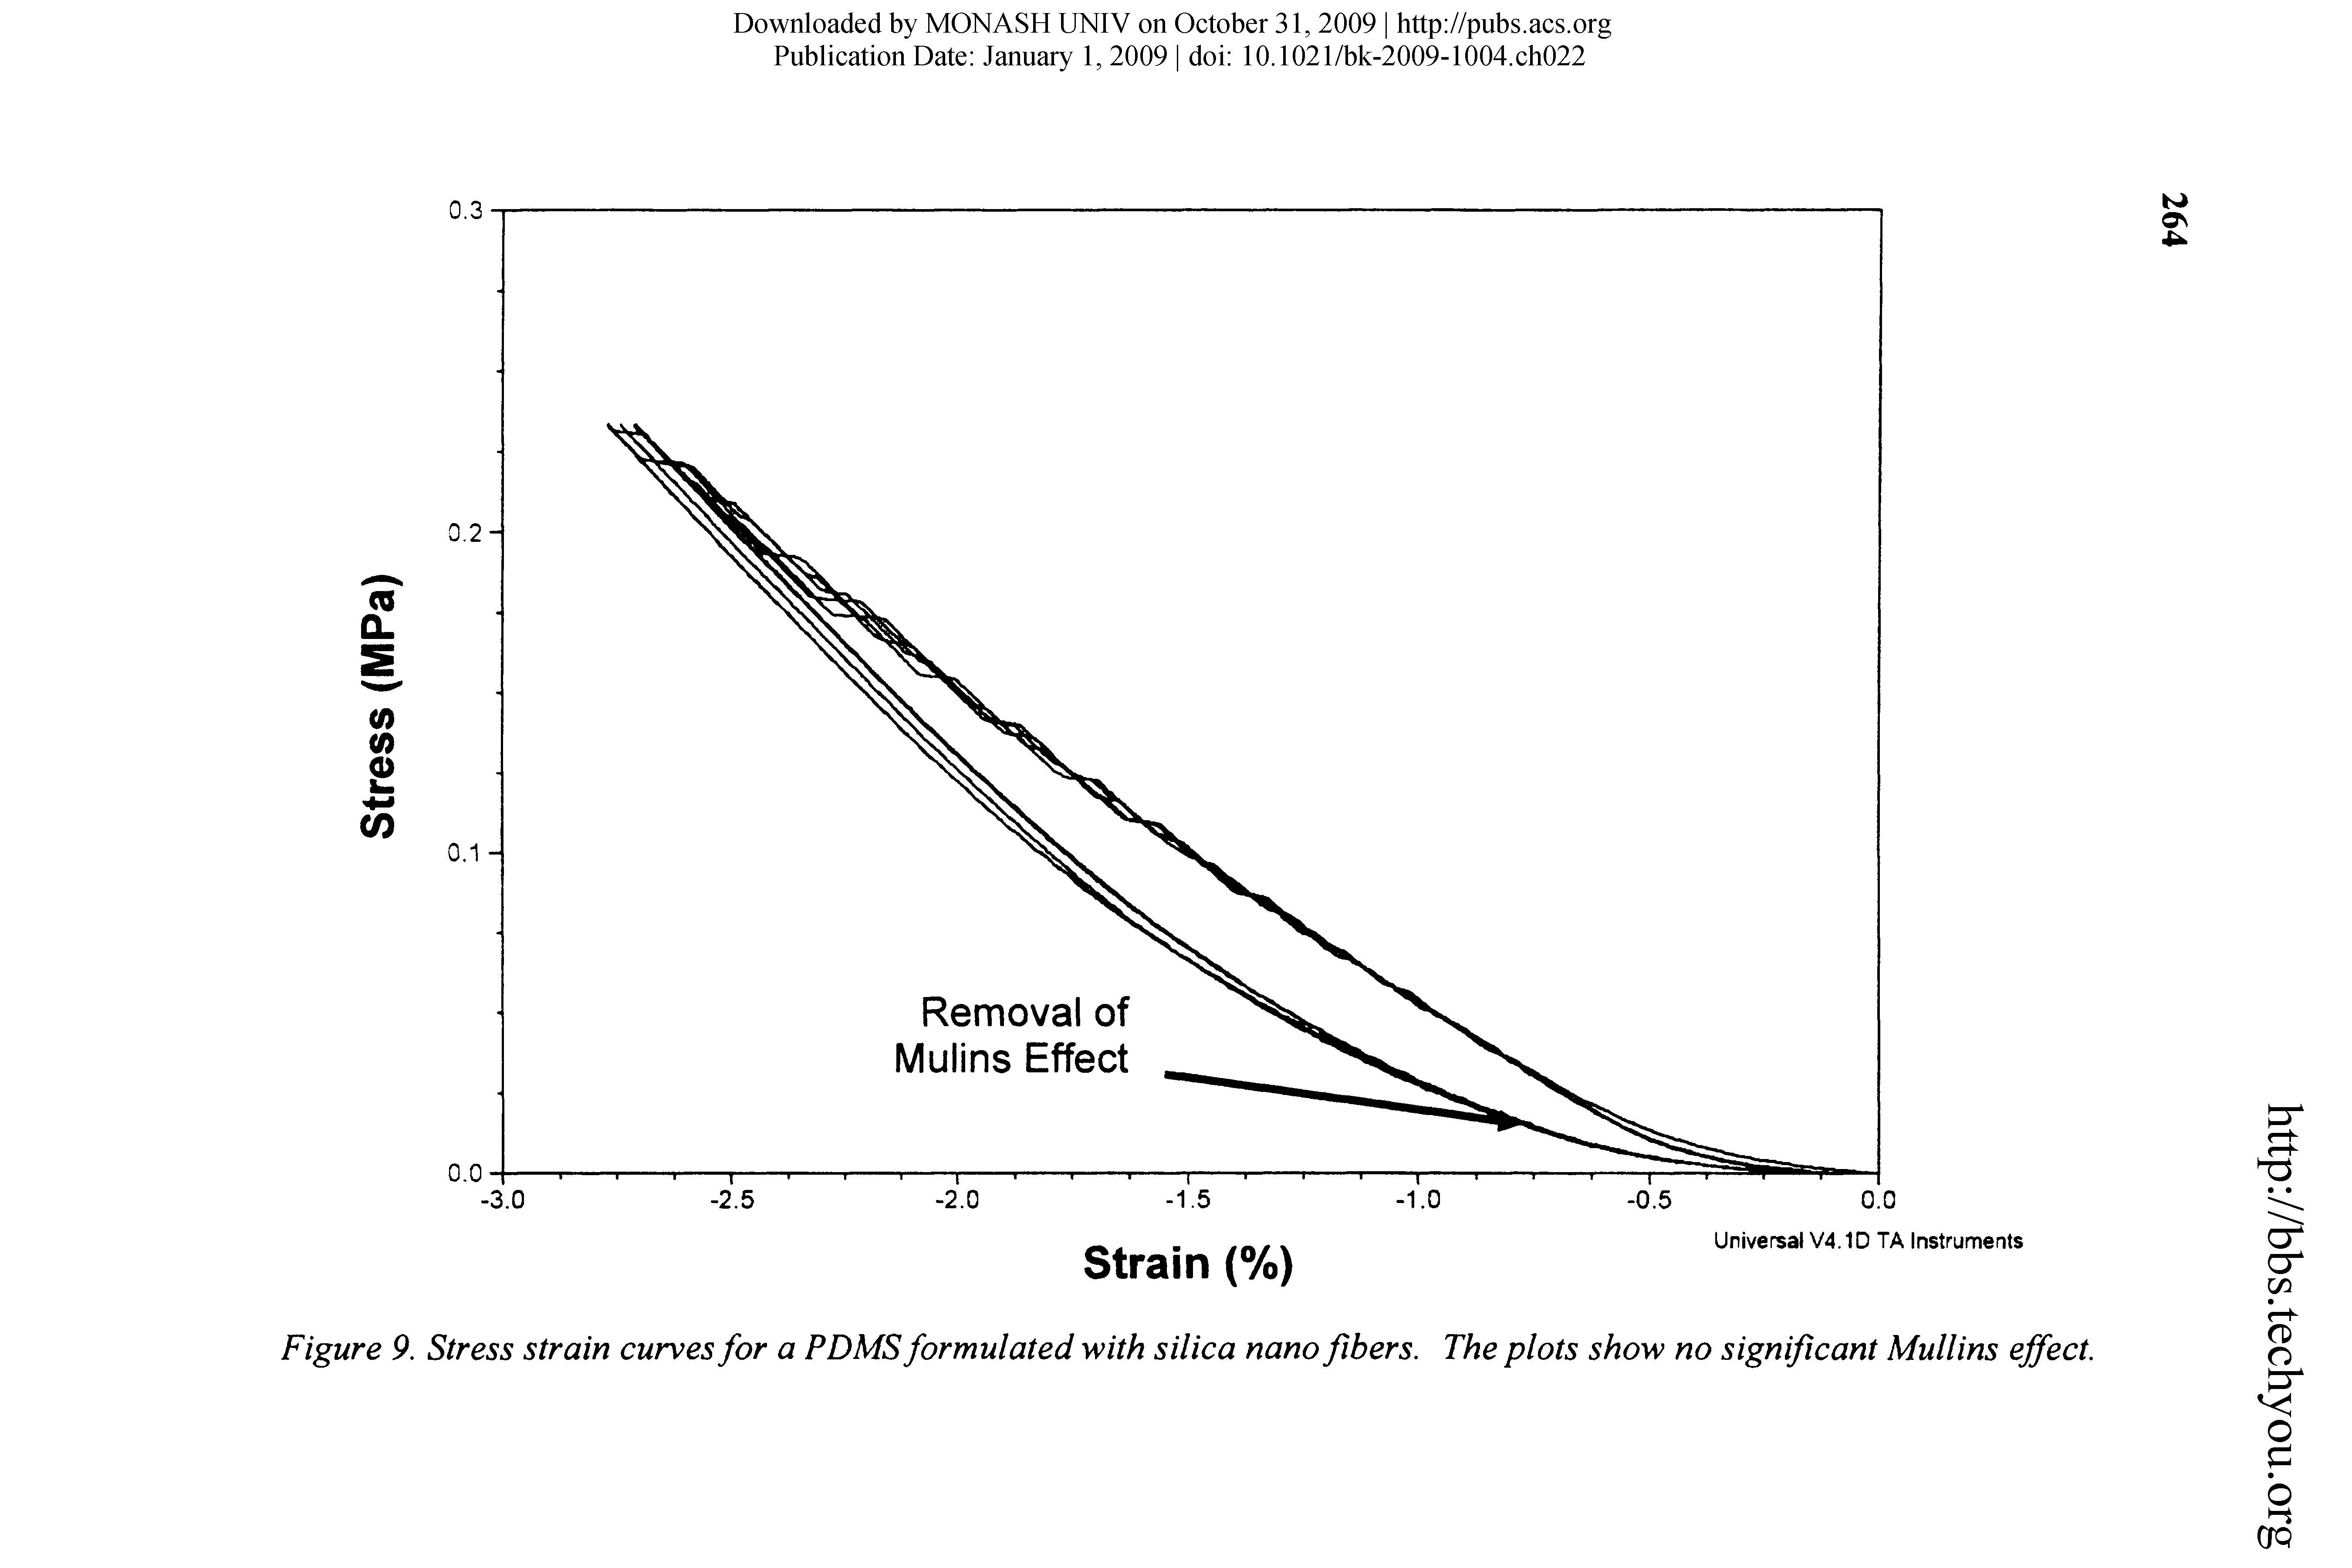 Figure 9. Stress strain curves for a PDMS formulated with silica nano fibers. The plots show no significant Mullins effect.